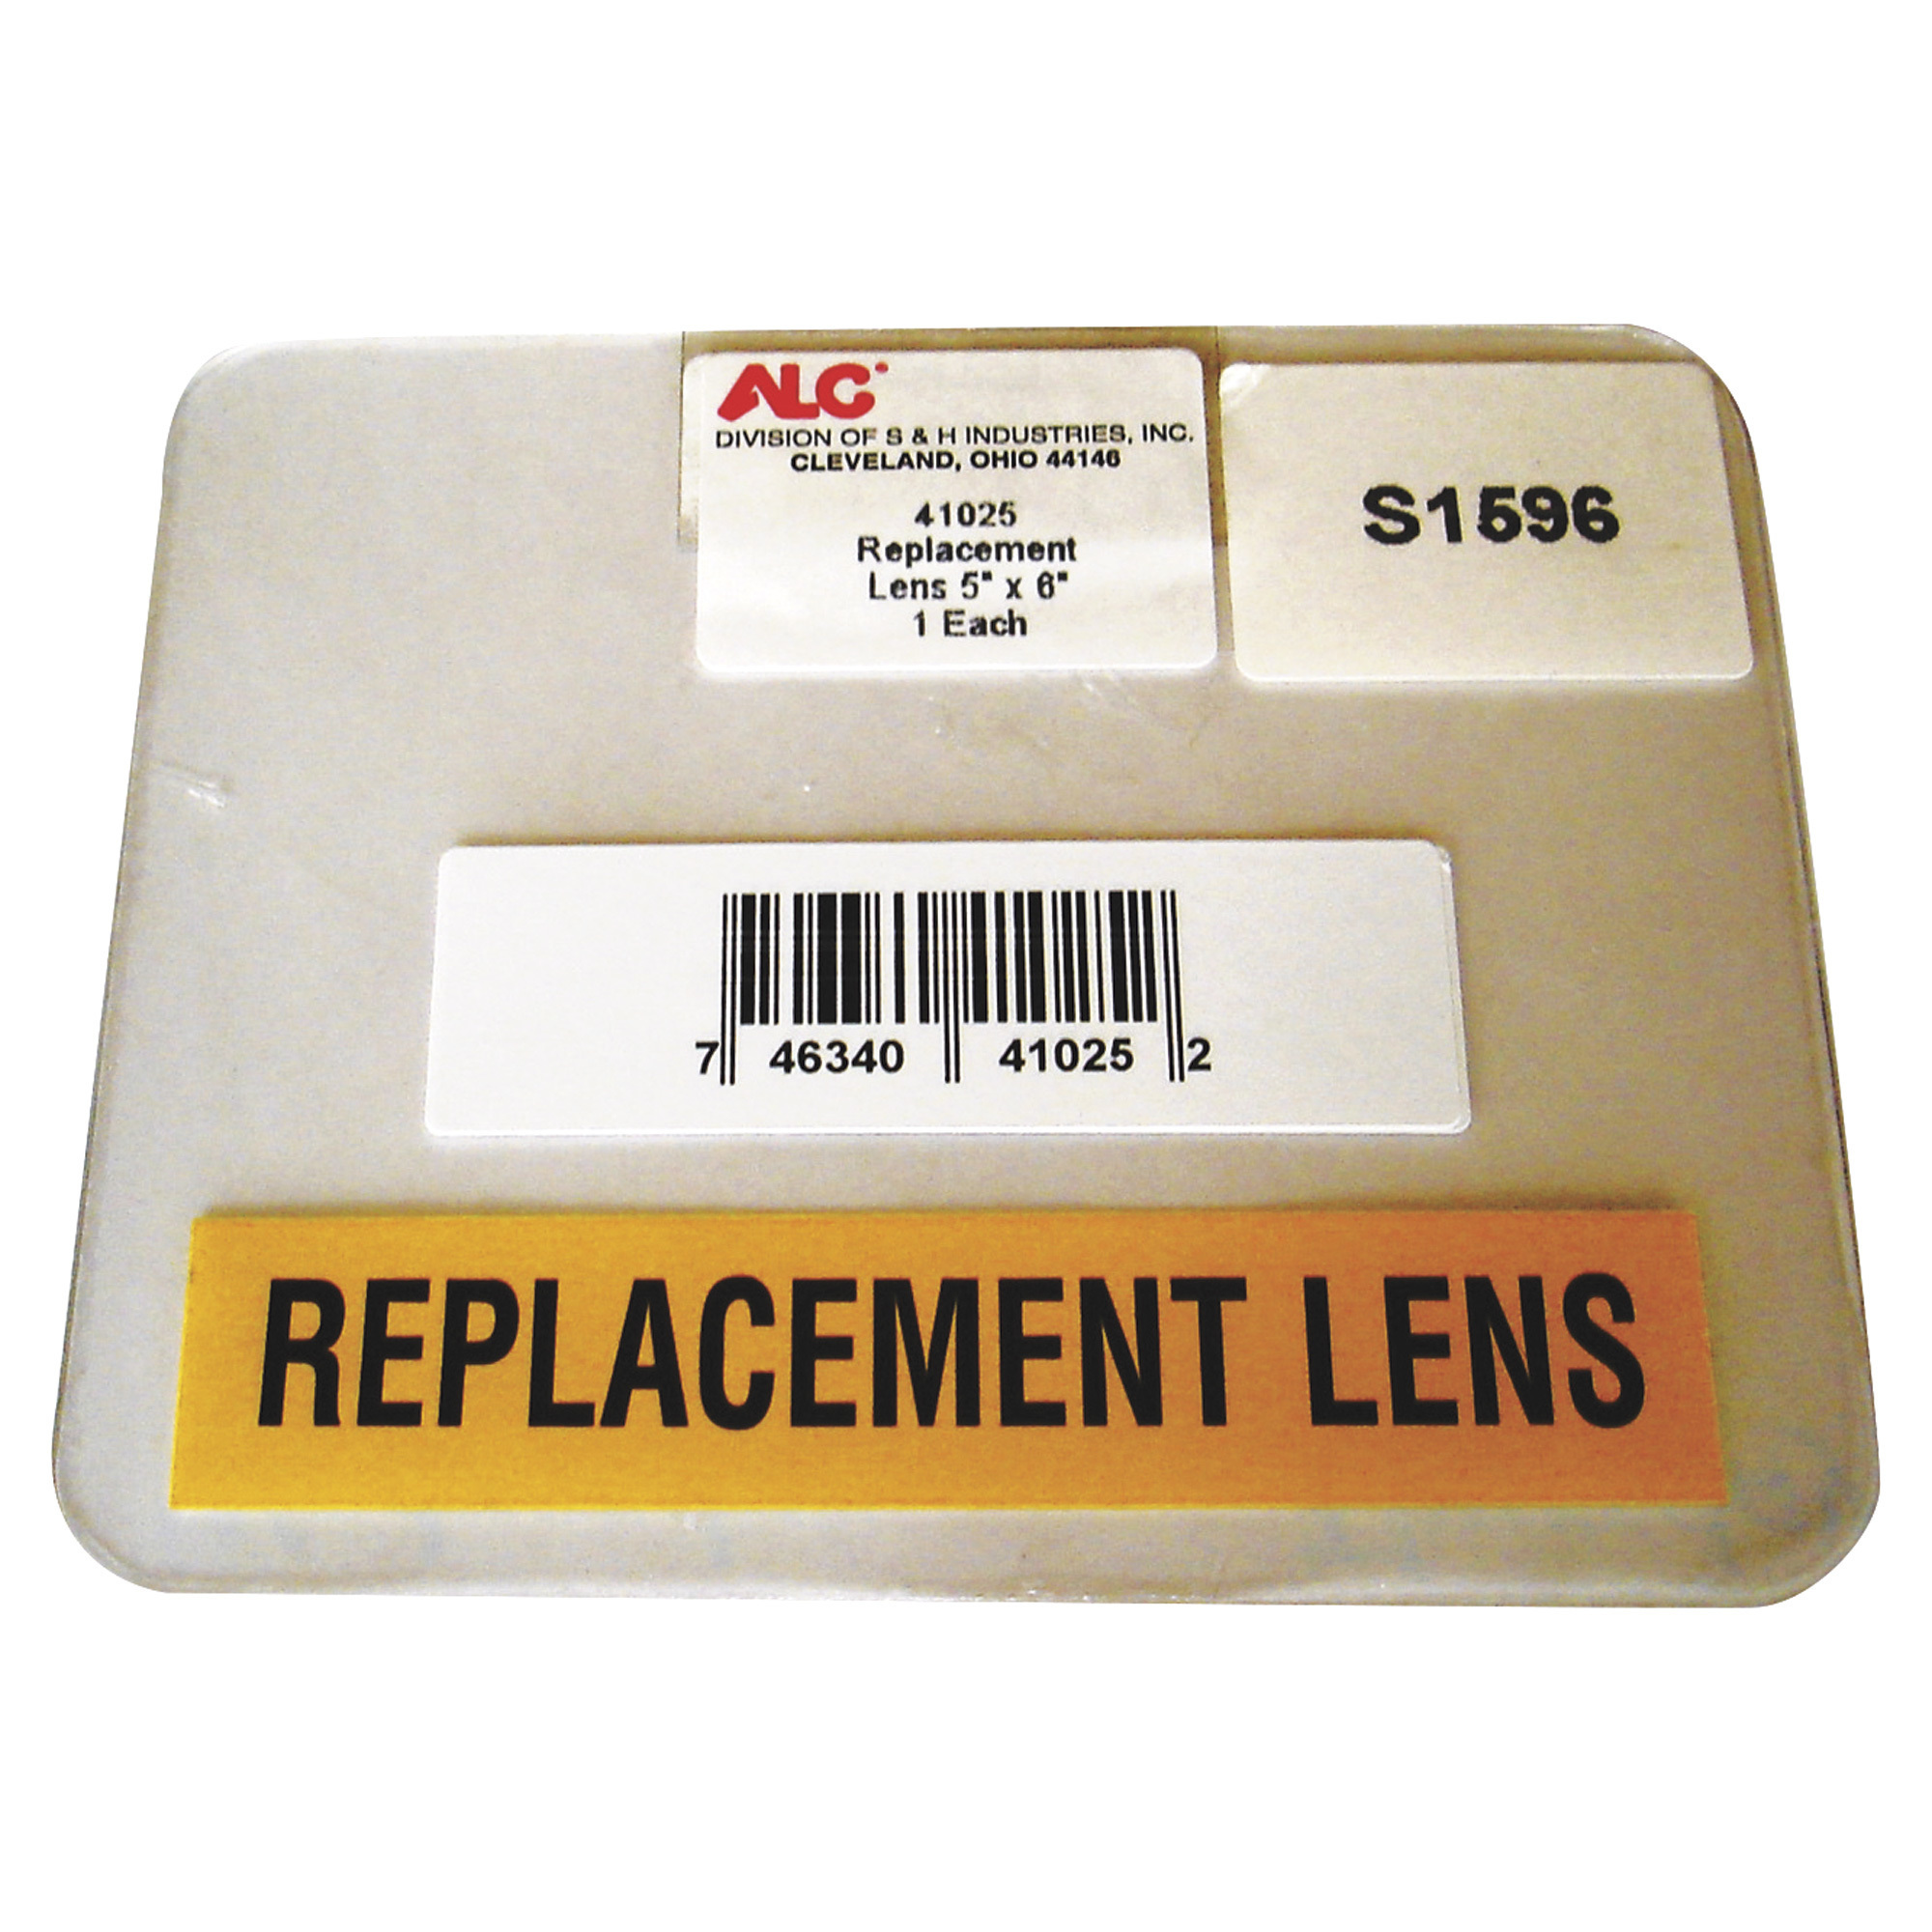 ALC Replacement Lens for Abrasive Blasting Hood â 5Inch x 6Inch, Model 47025